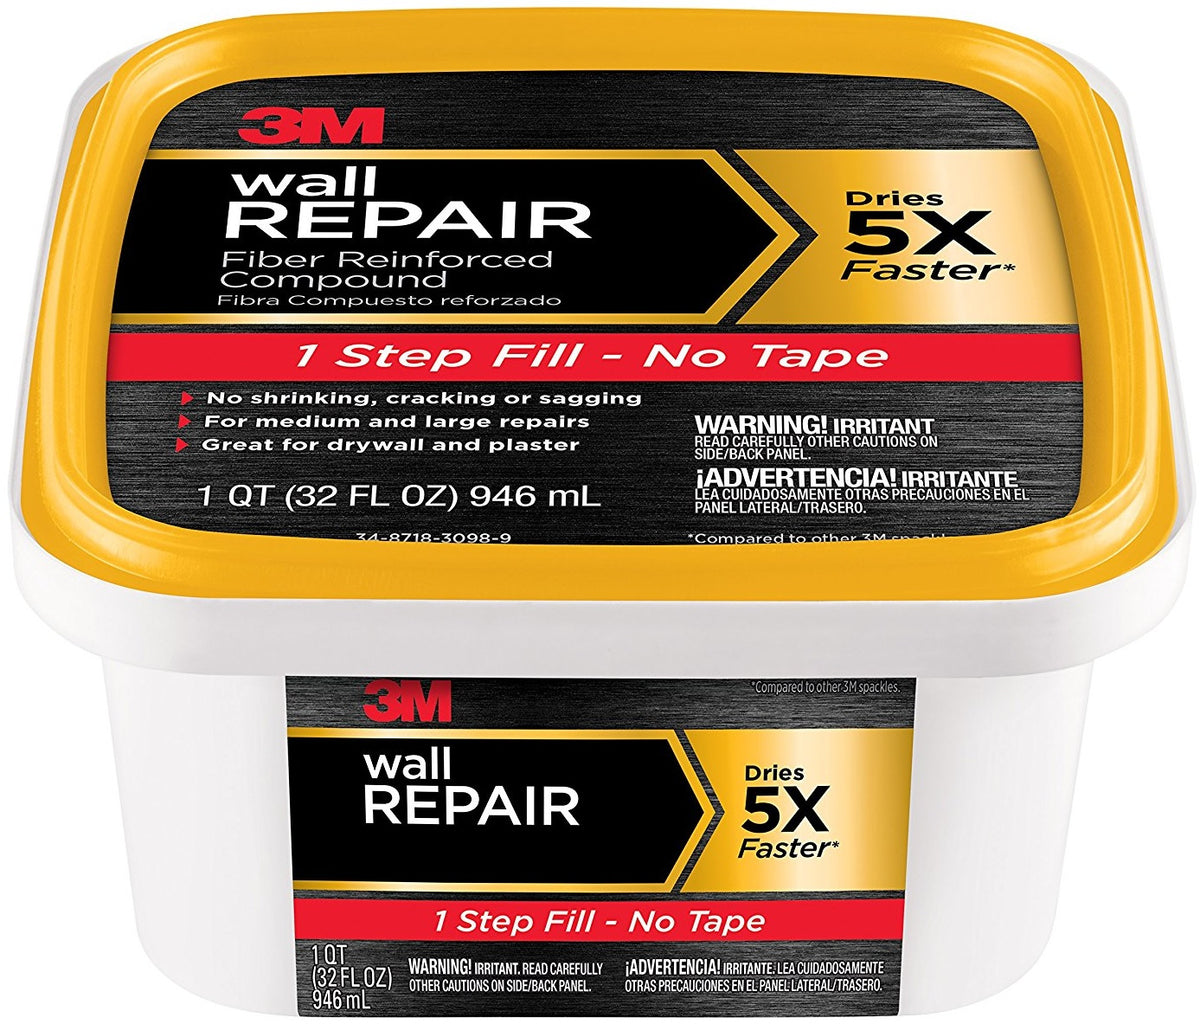 Buy 3m fiber reinforced compound - Online store for patching & repair, spackling in USA, on sale, low price, discount deals, coupon code